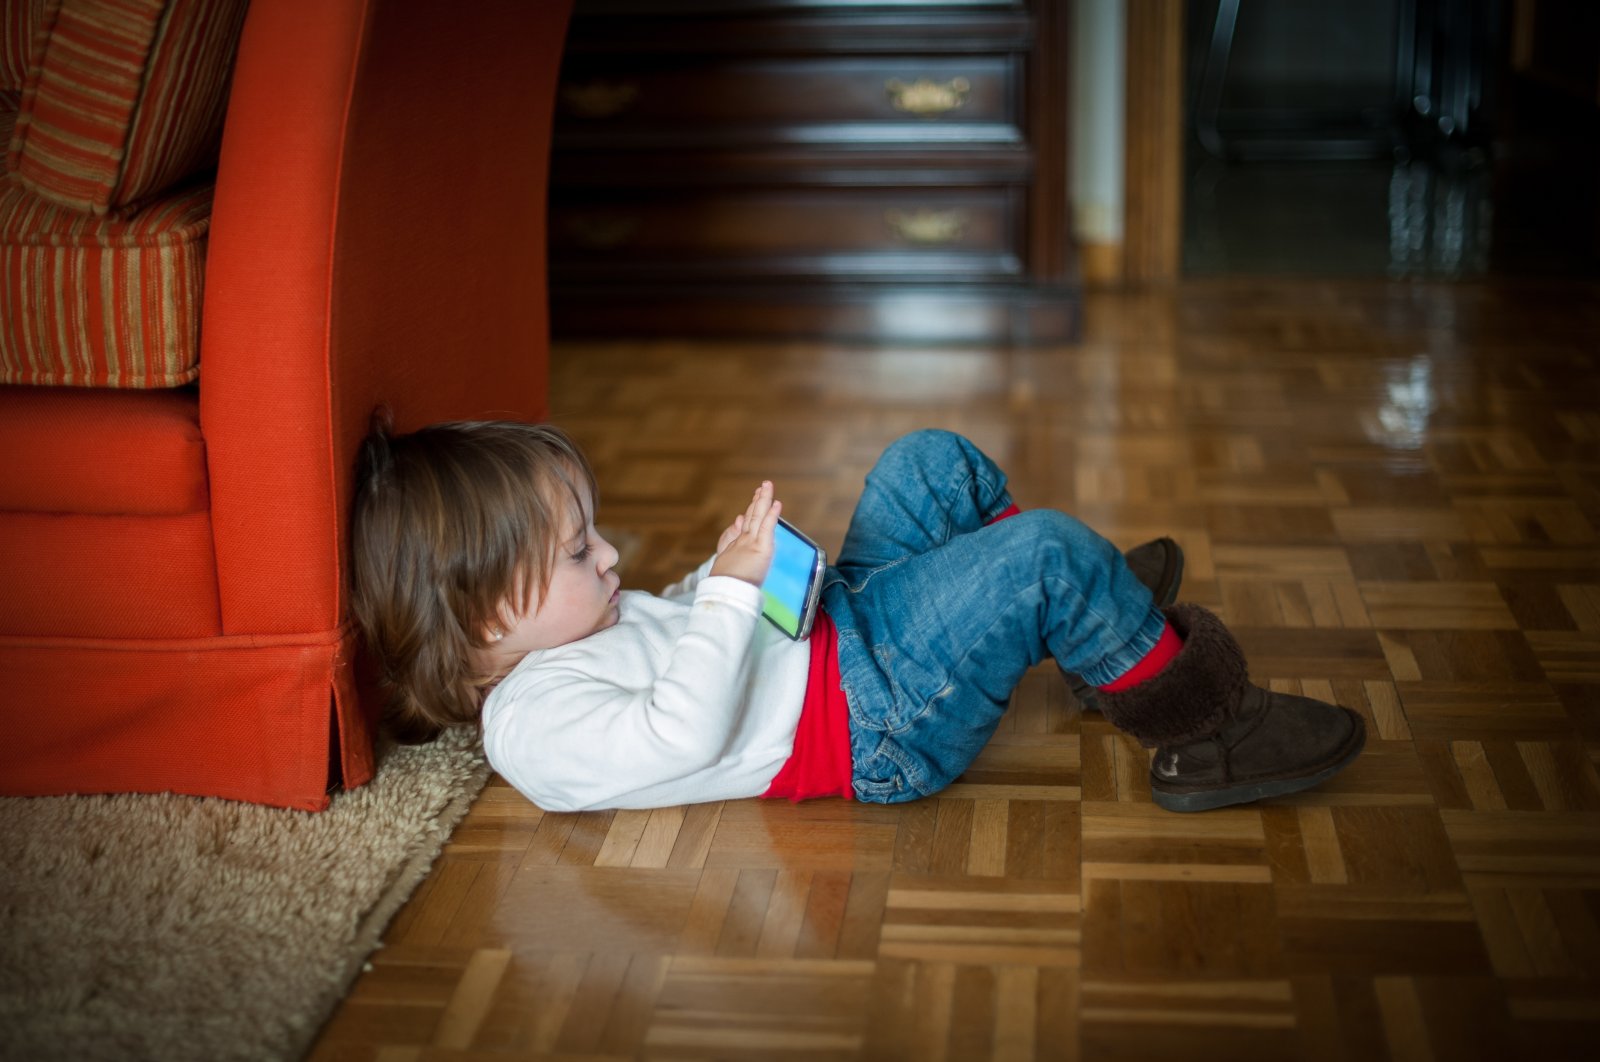 The Ministry of Family and Social Services has emphasized the potential dangers linked to the divulgence of personal information and sensitive images of children on digital platforms. (Getty Images)